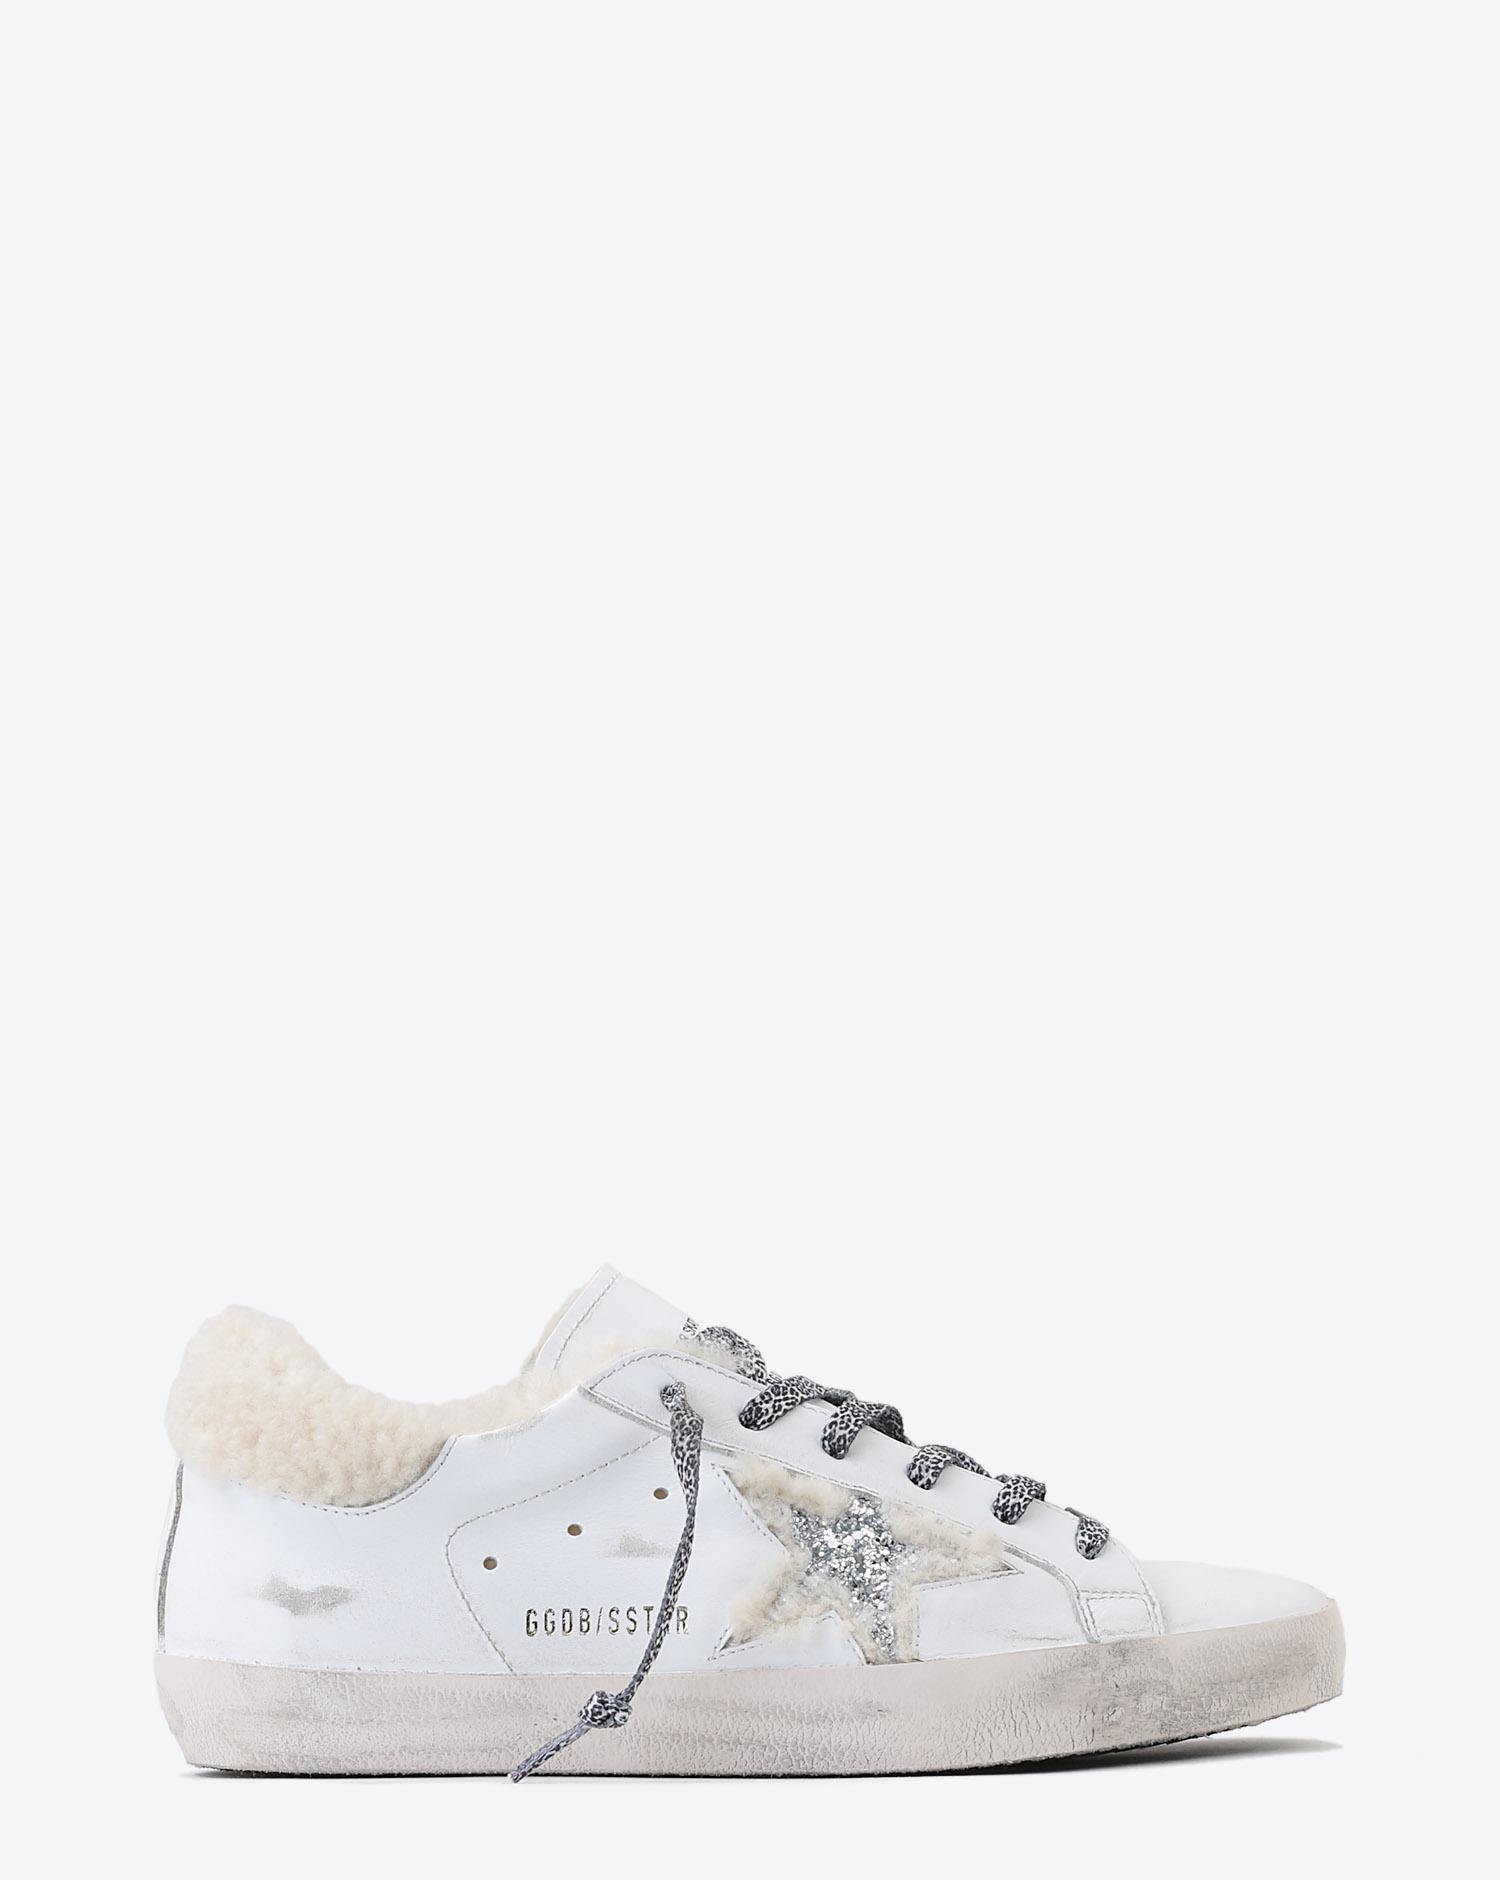 Golden Goose Woman Pré-Collection Sneakers Superstar - White Shearling- Silver Glitter Star  